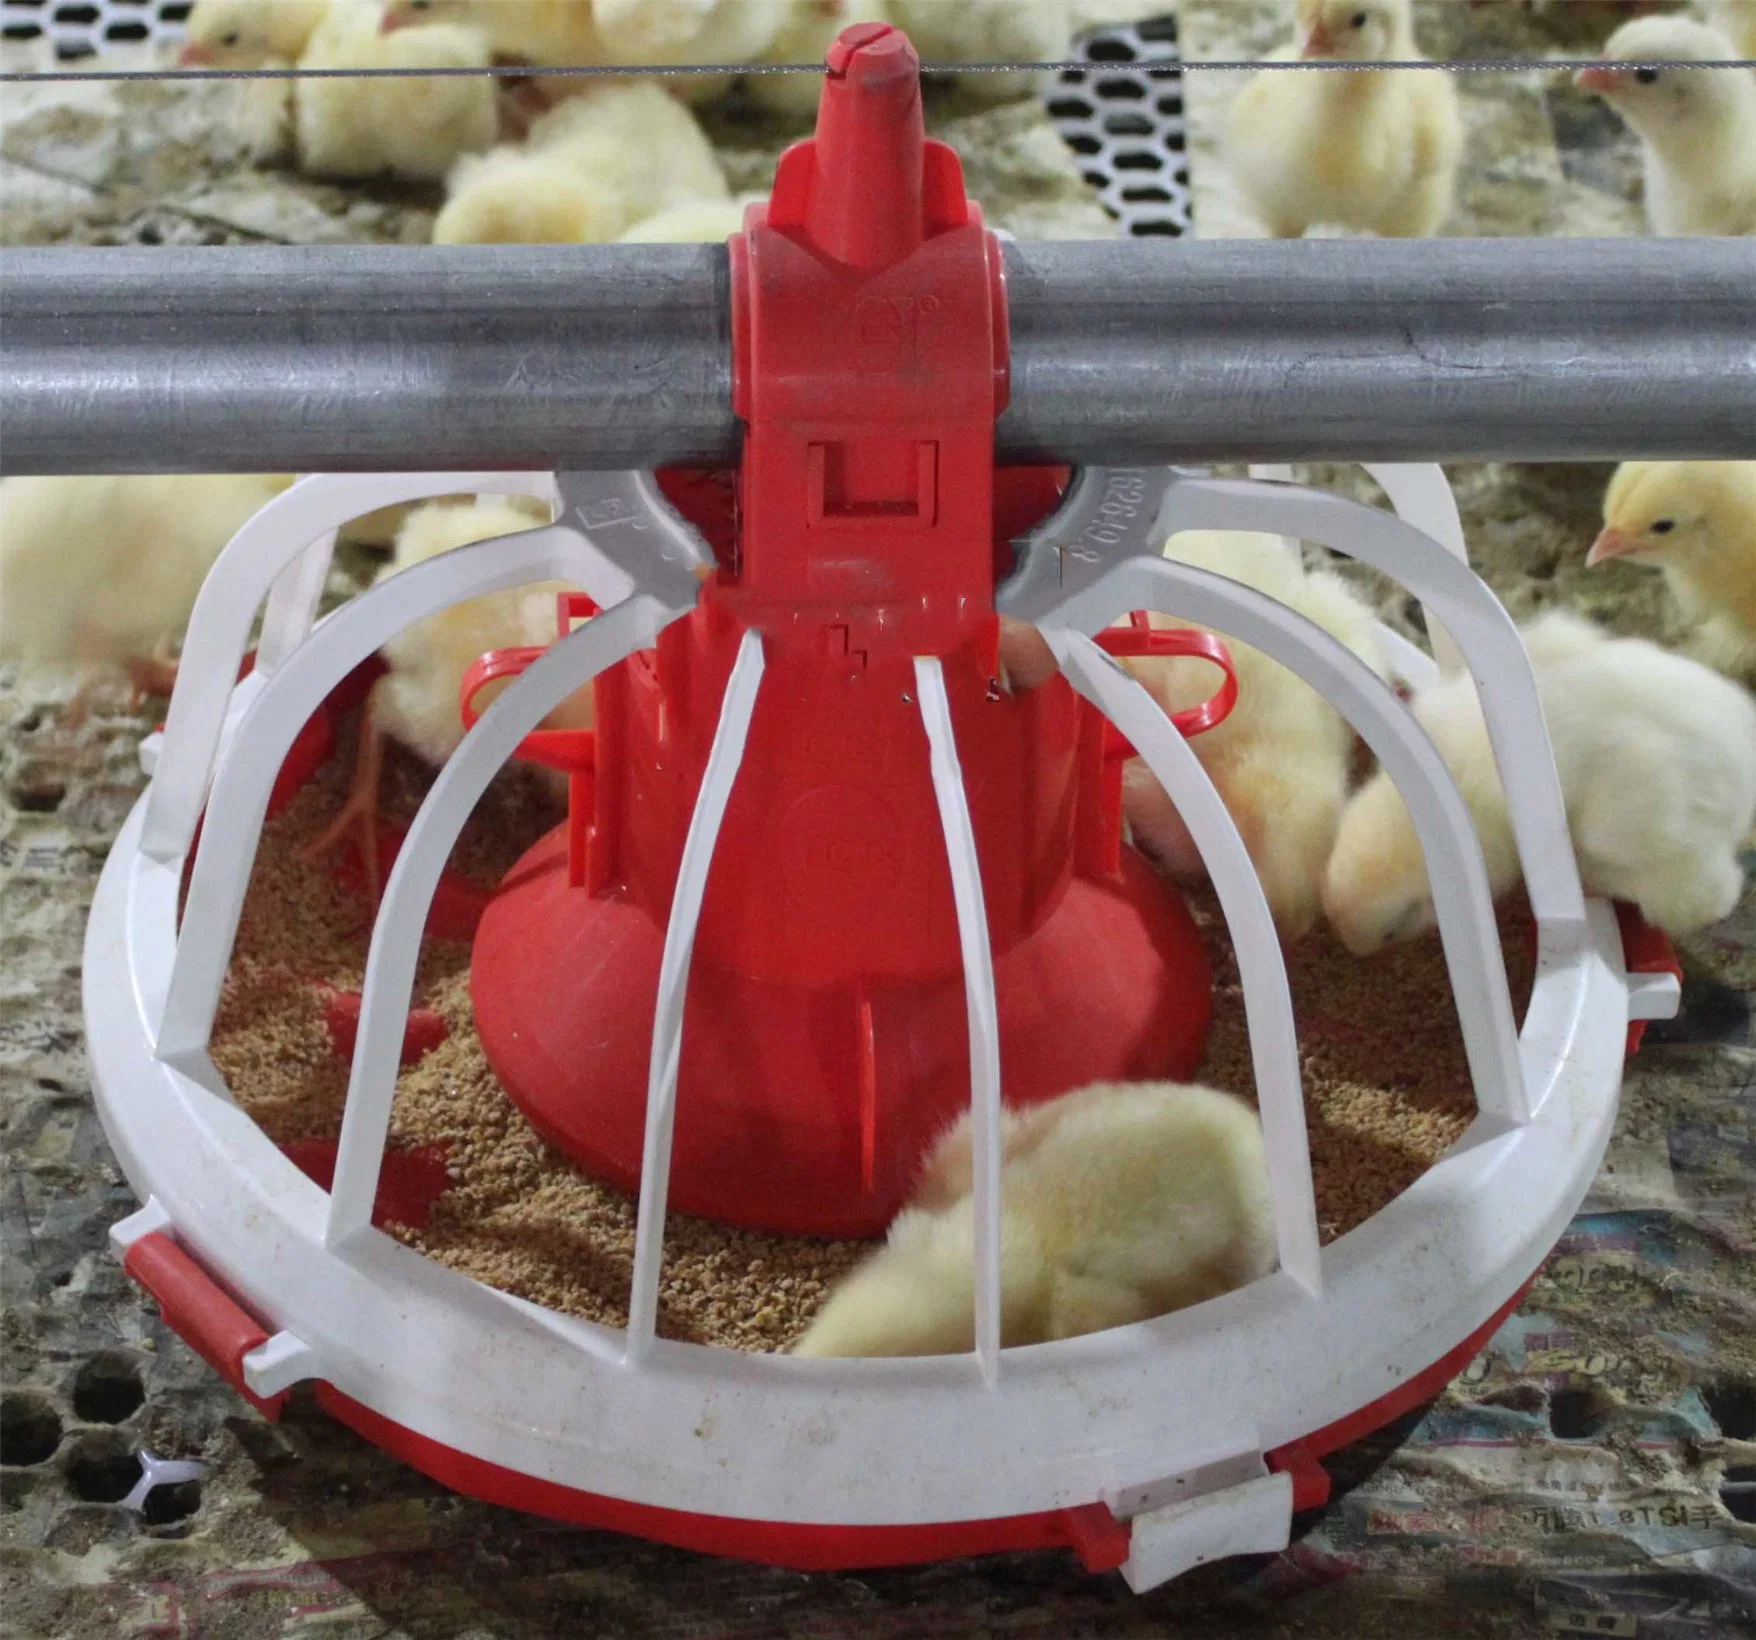 Professional Design Poultry Farm Chicken House Equipment Pan Feeder for Broiler/Breeder/Layer